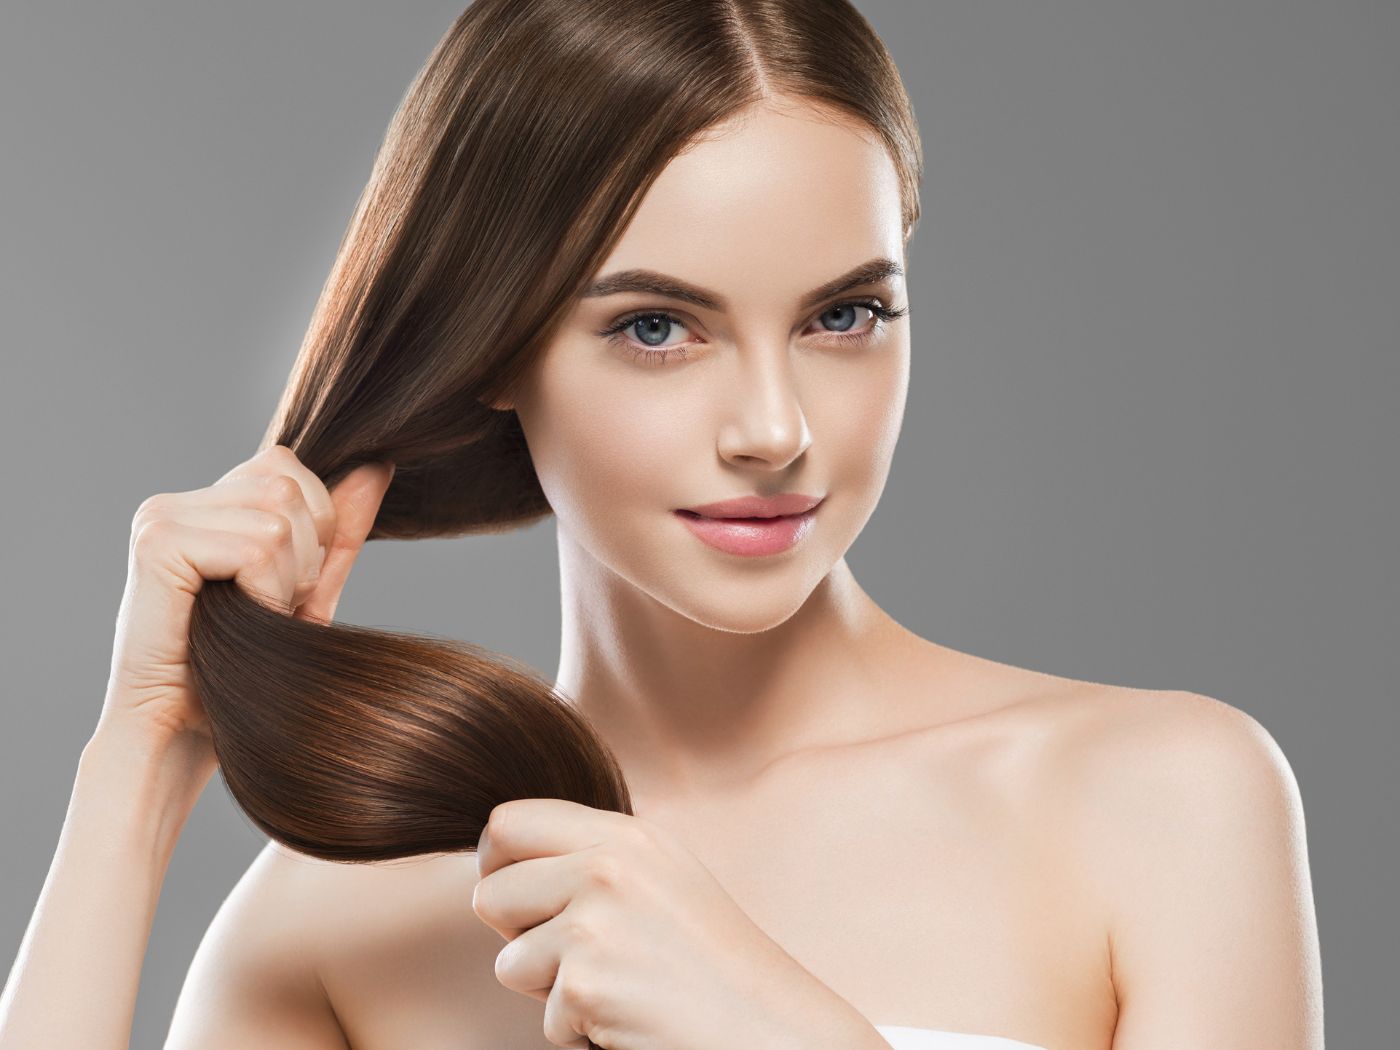 Hair Growth Tips: How To Grow Your Hair Faster - Pure Sense